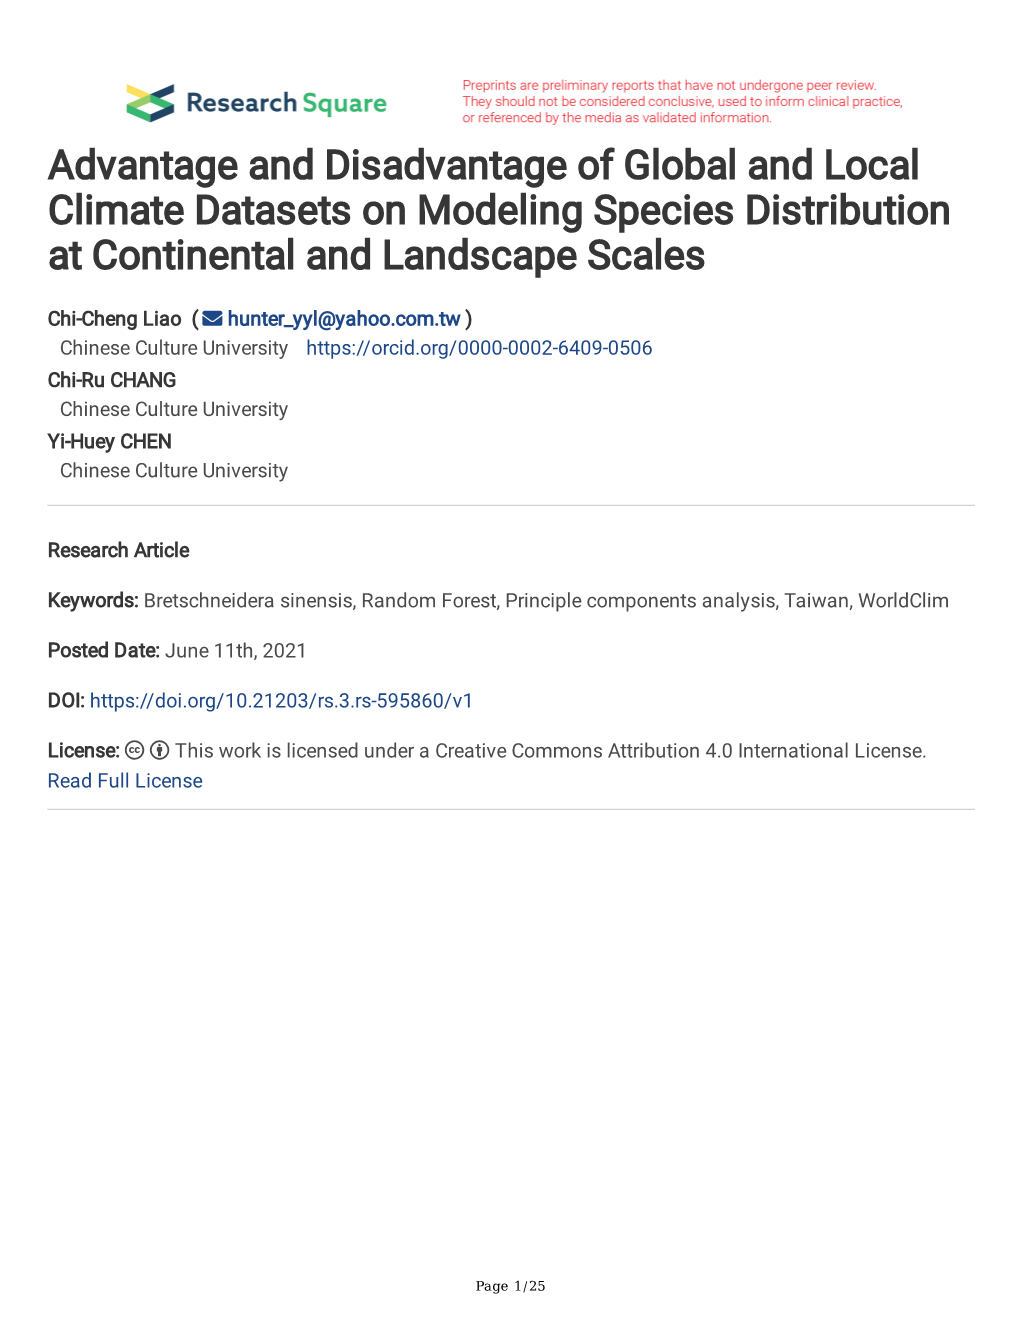 Advantage and Disadvantage of Global and Local Climate Datasets on Modeling Species Distribution at Continental and Landscape Scales